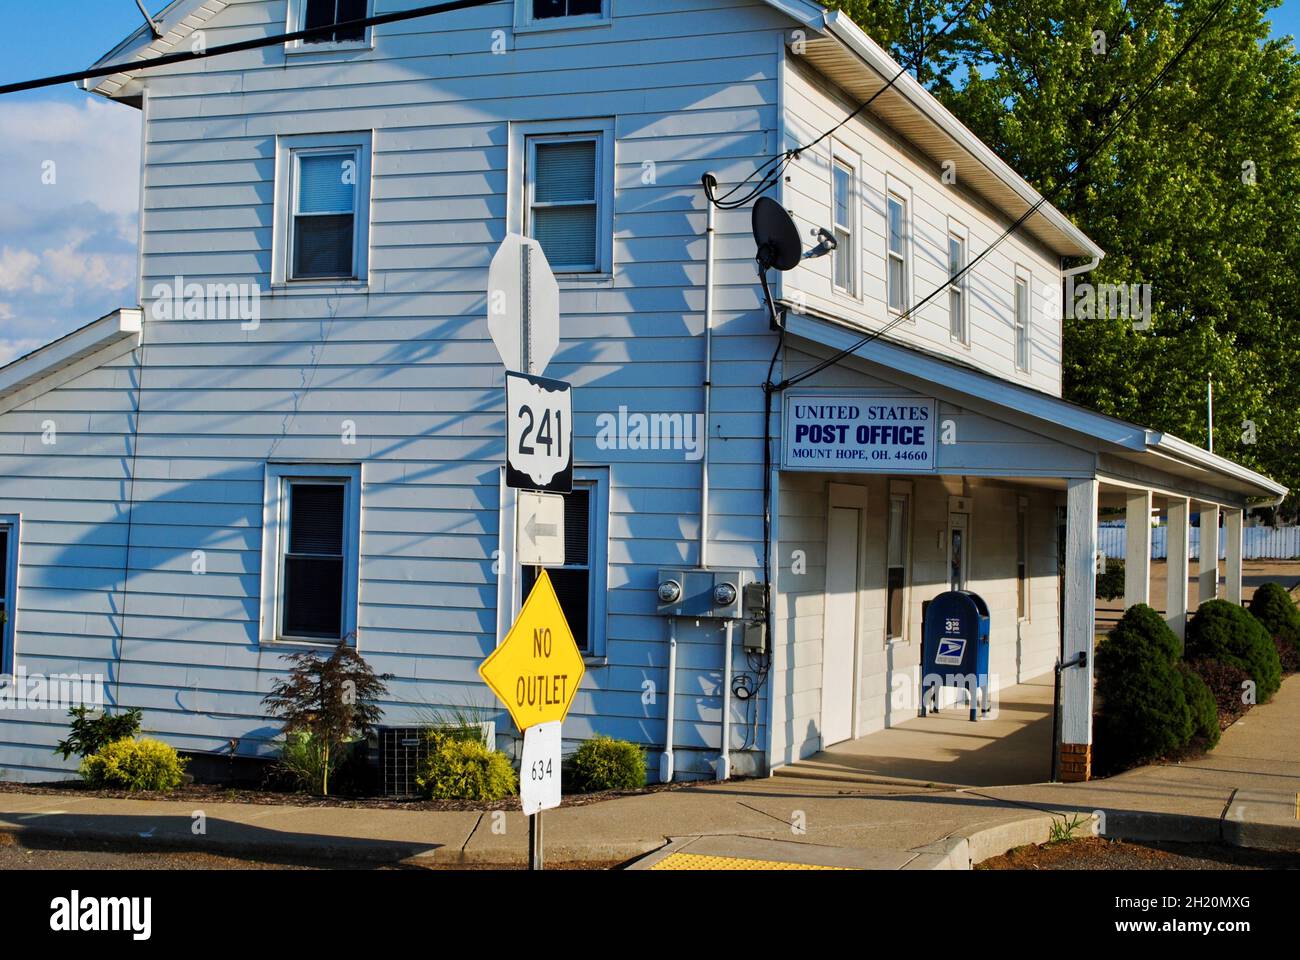 Mount Hope post office in Amish country, Ohio Stock Photo